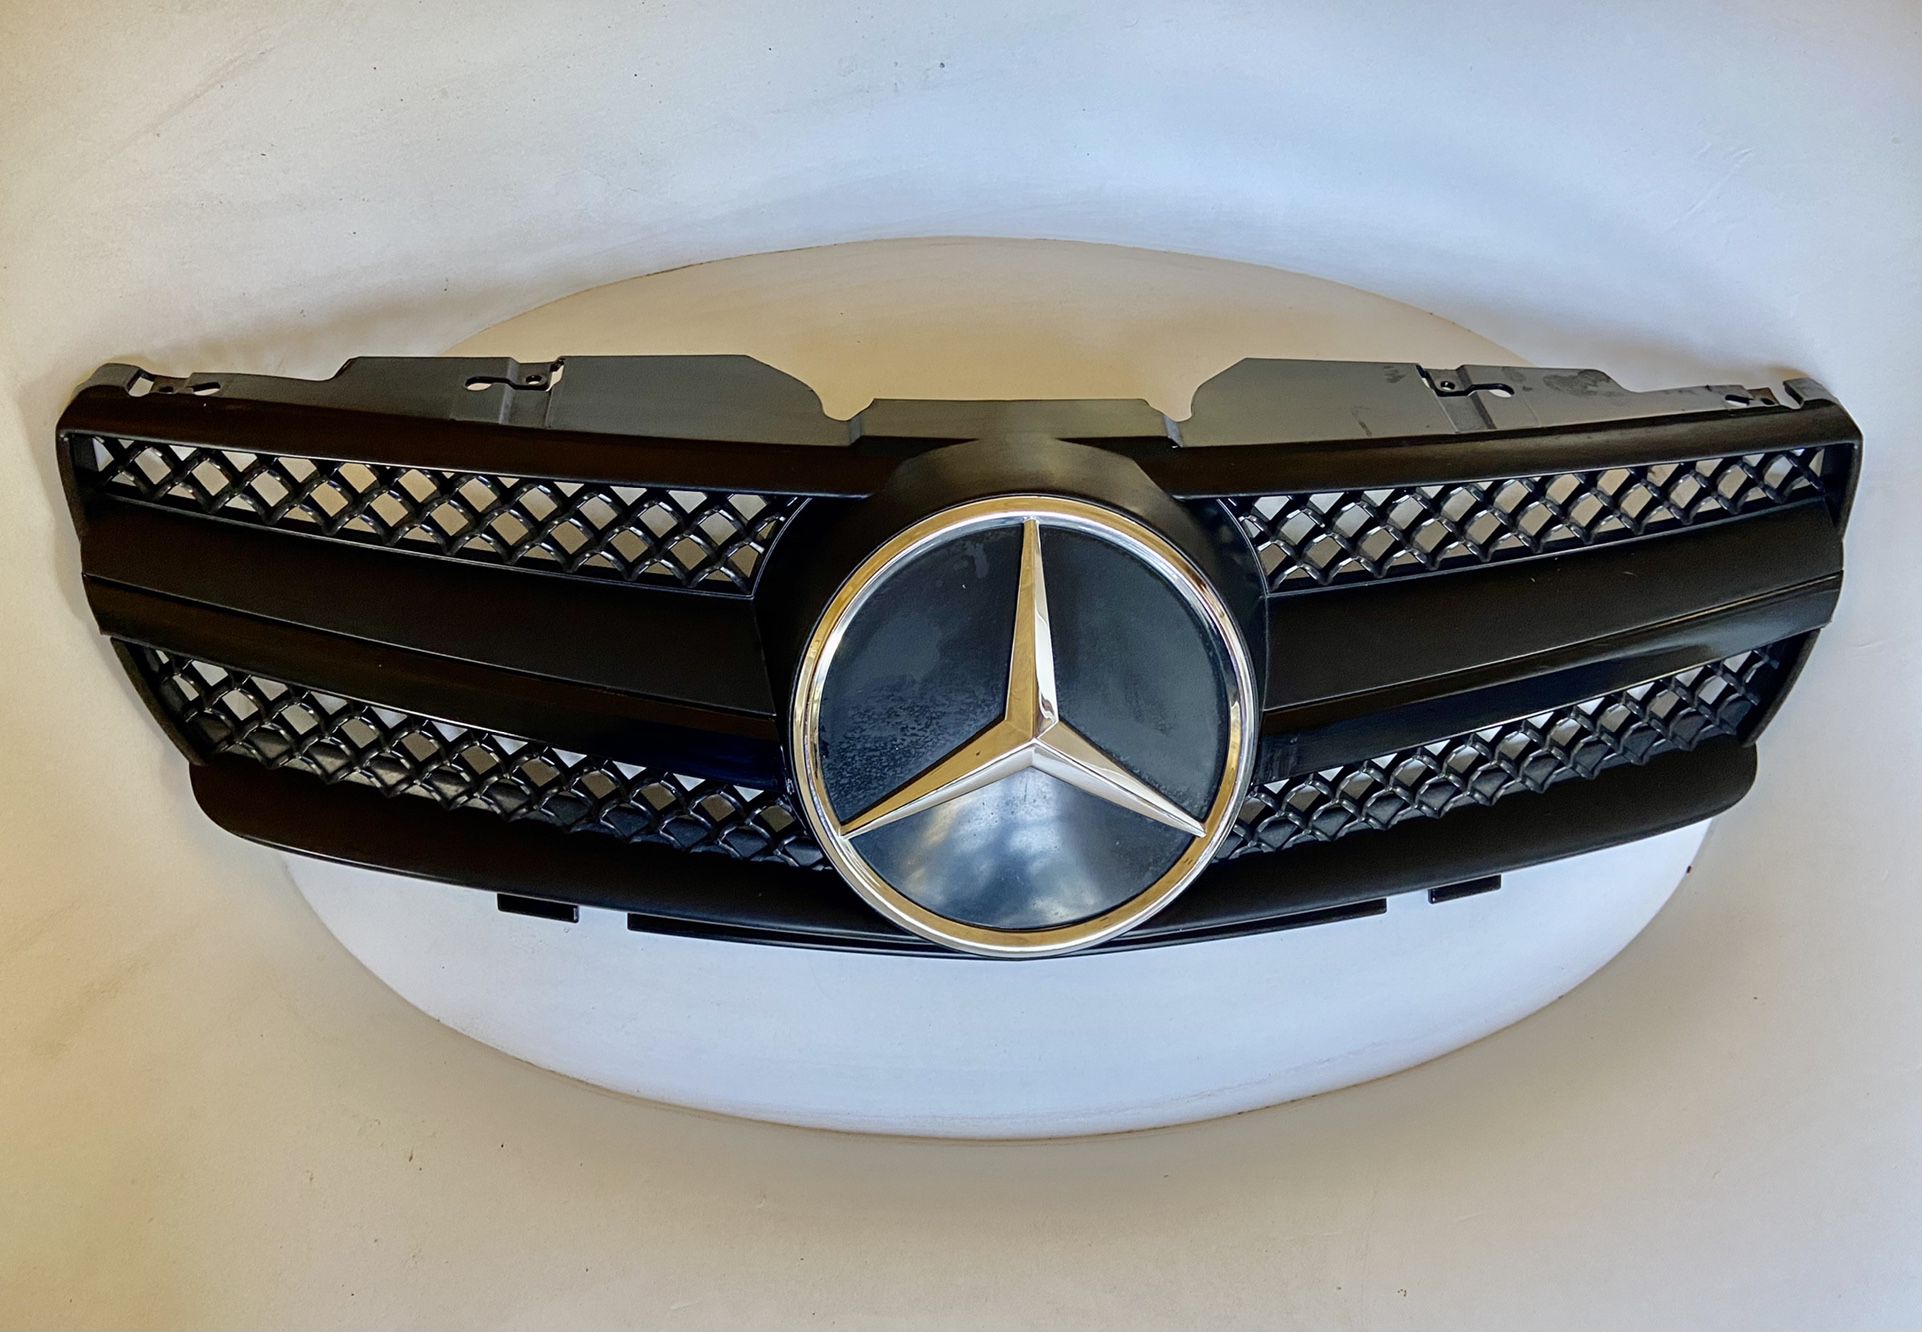 2003-2009 SL r230 single fin black updated grill for Mercedes Benz SL. $80. Price is firm. Pick up only.